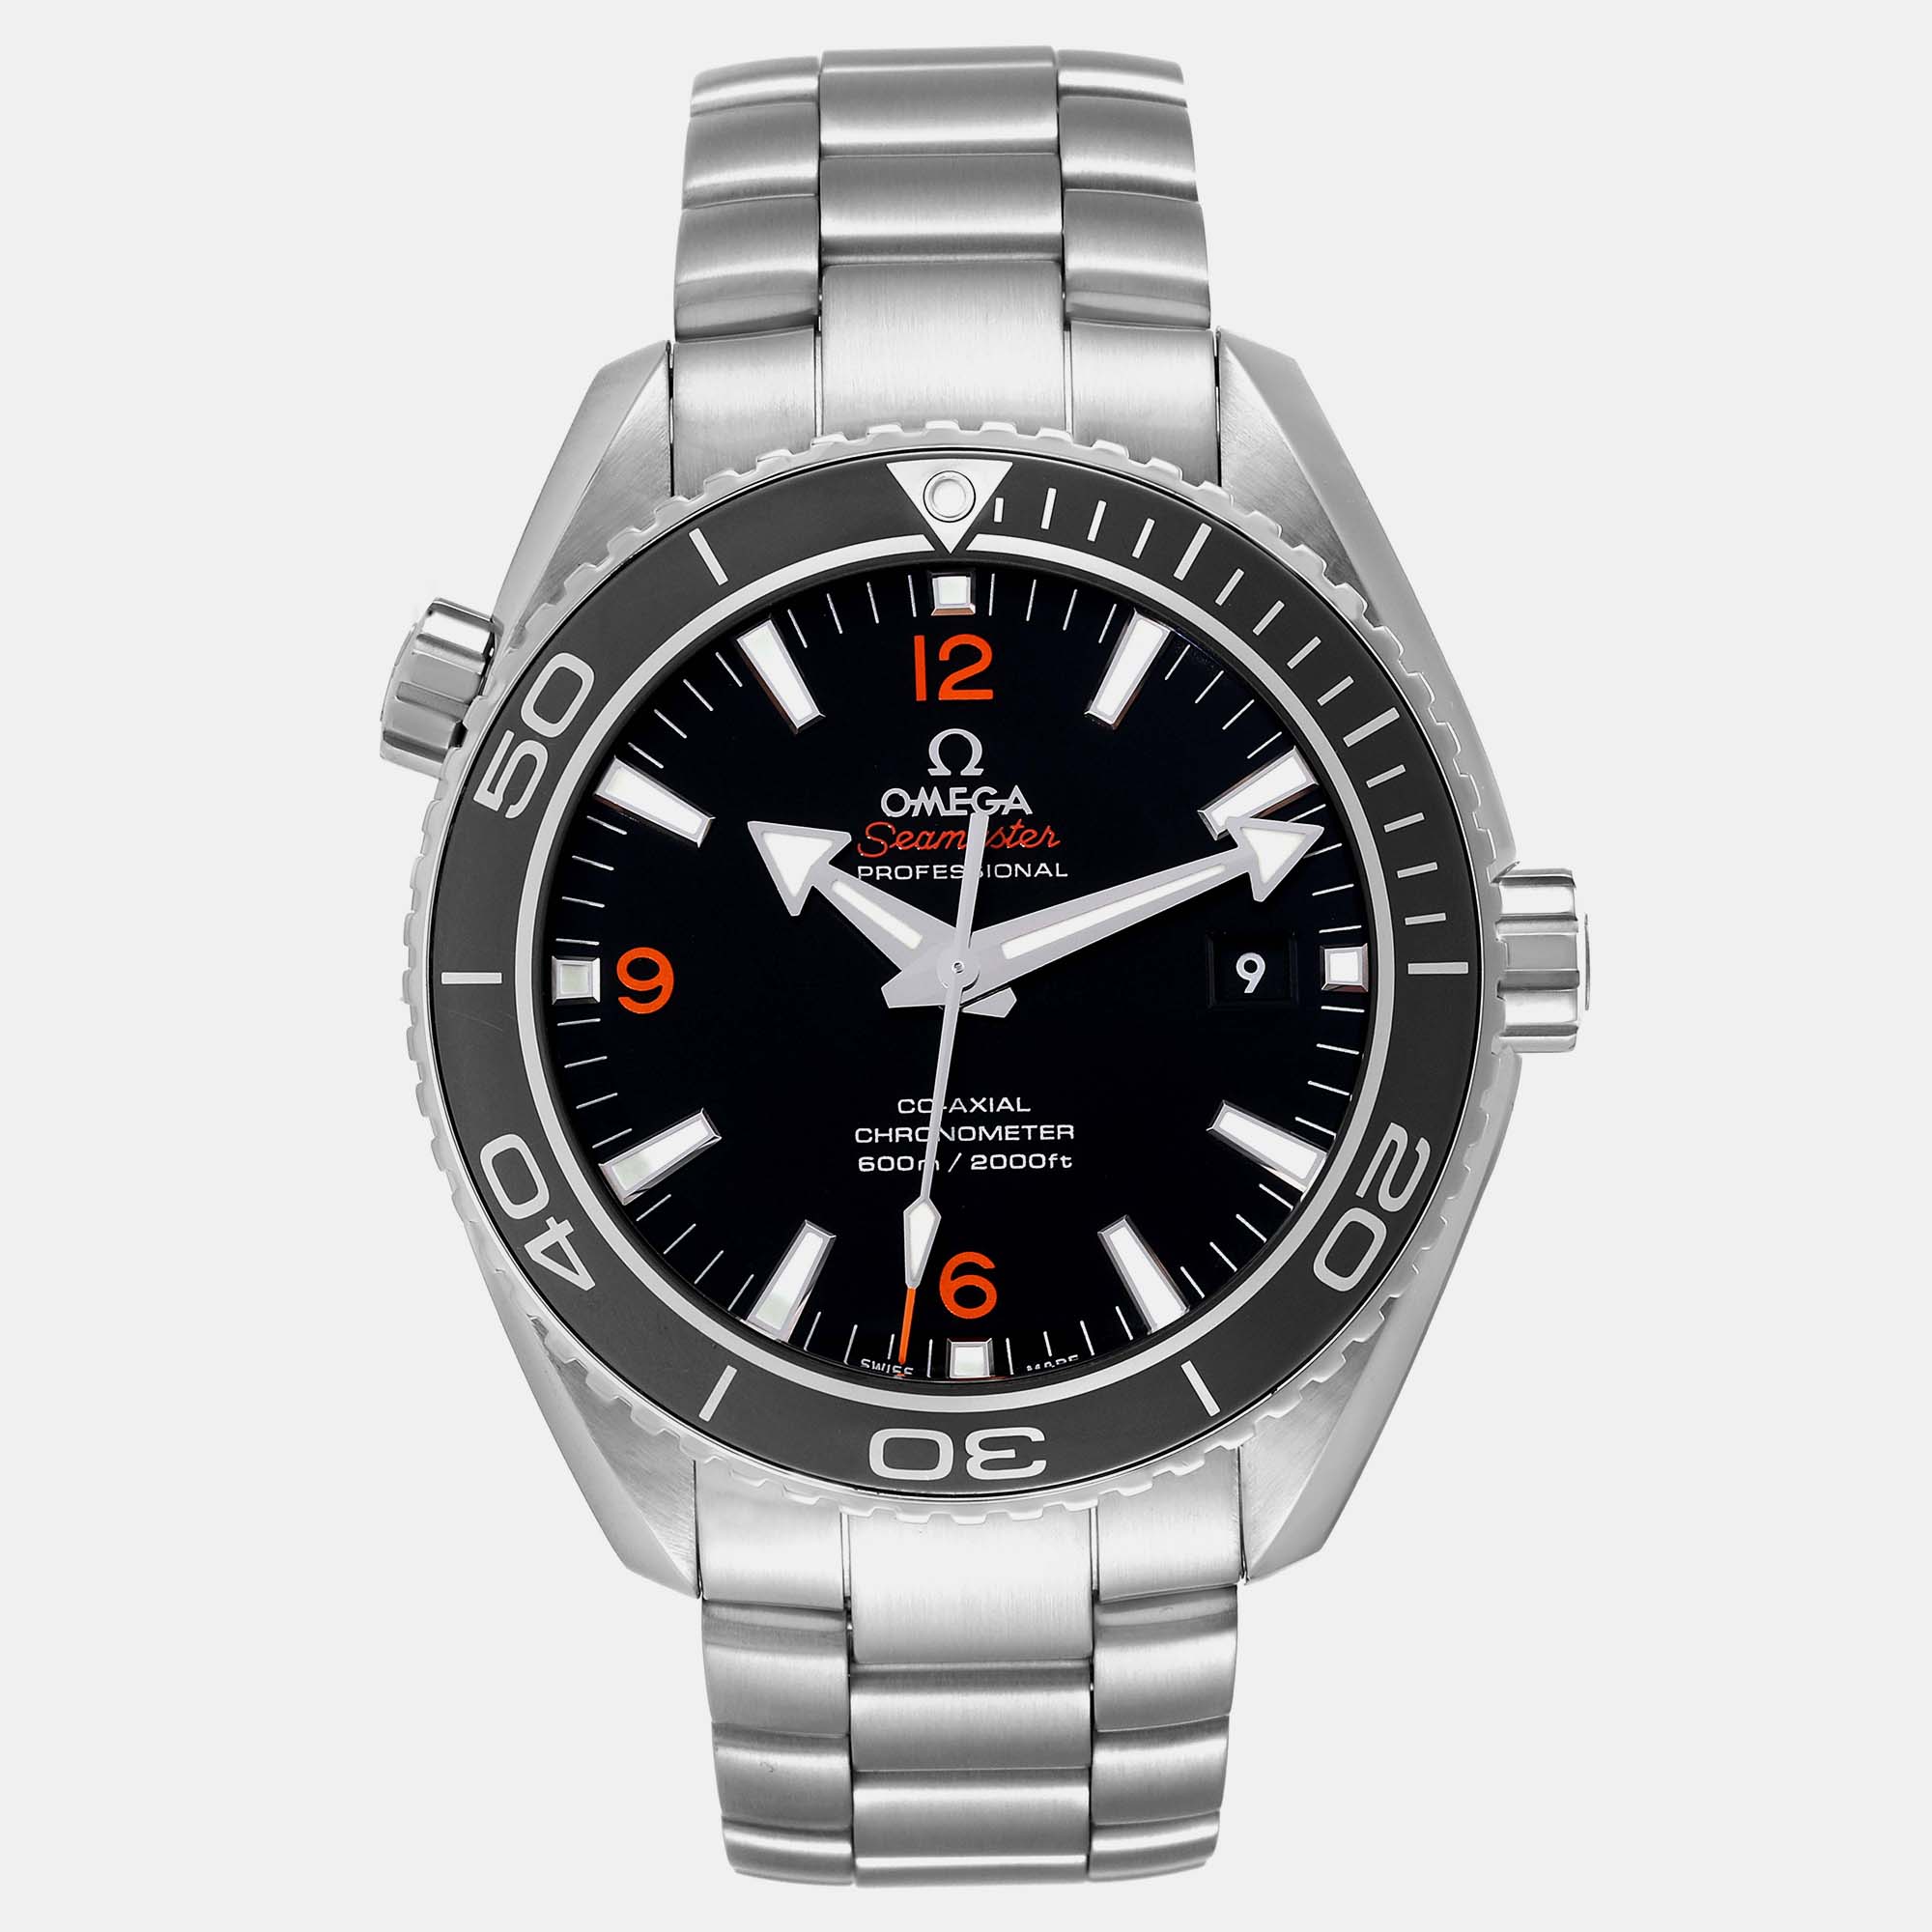 A meticulously crafted watch holds the promise of enduring appeal all day comfort and investment value. Carefully assembled and finished to stand out on your wrist this Omega timepiece is a purchase you will cherish.